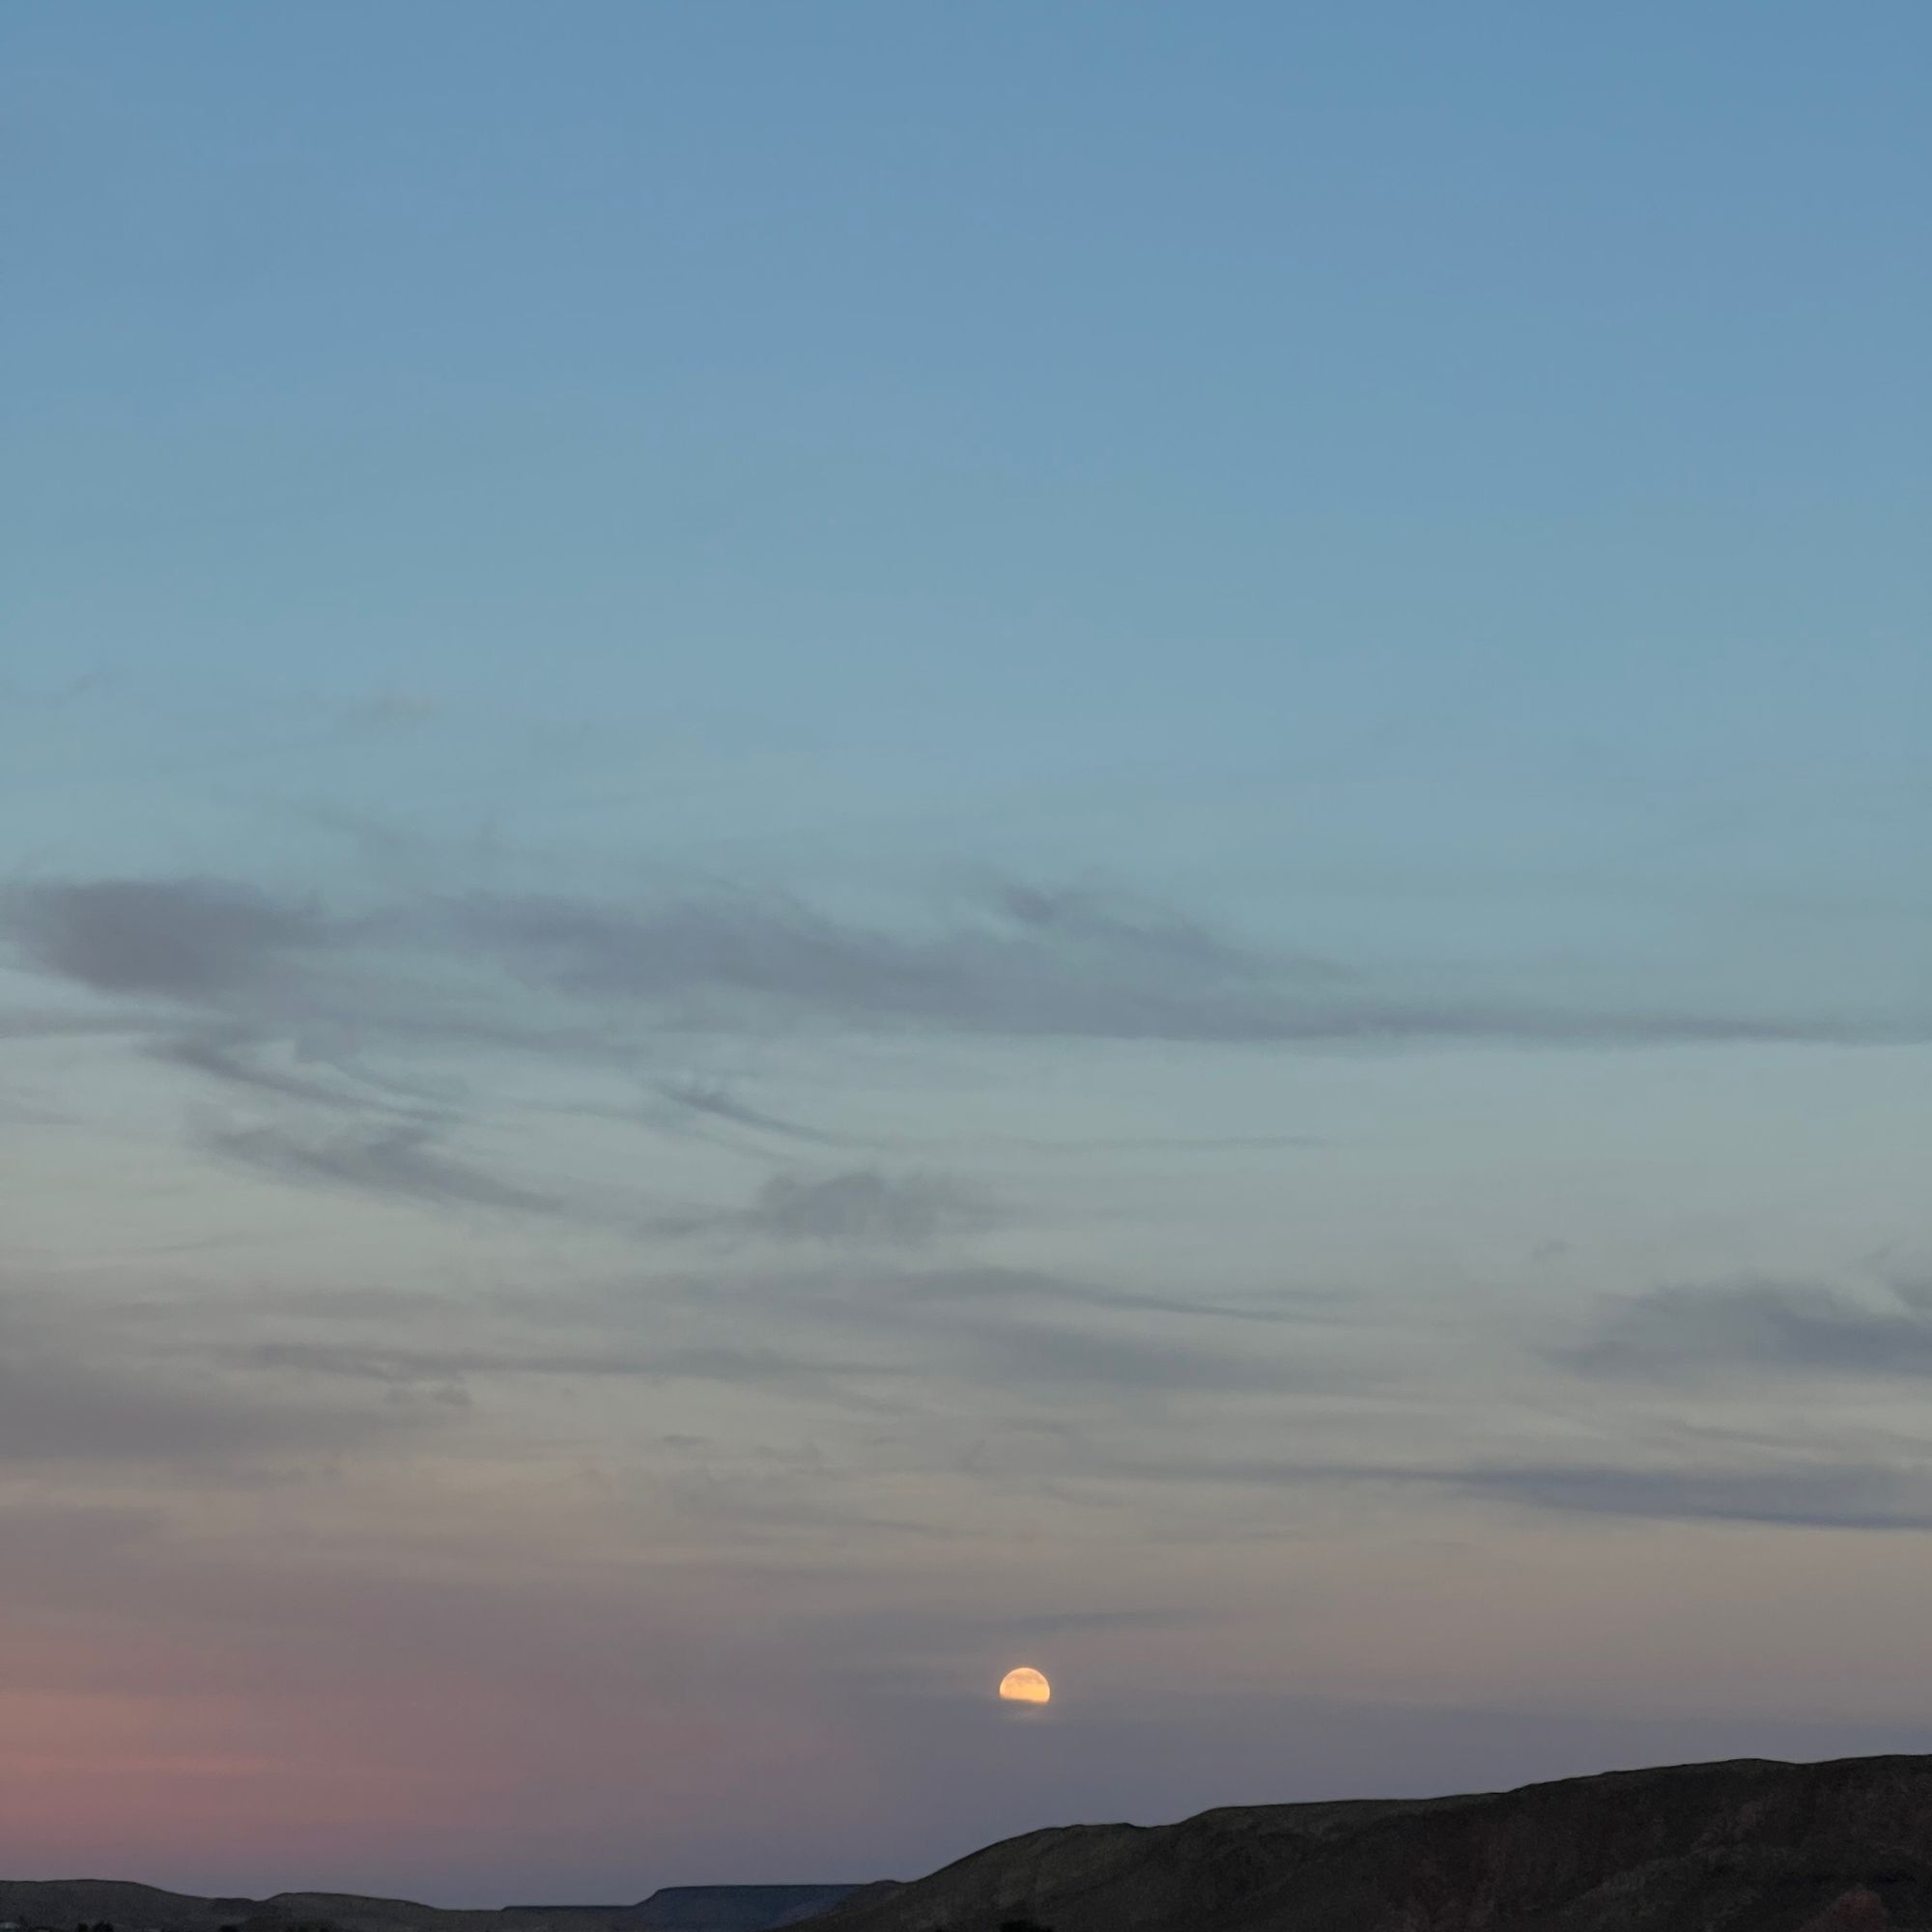 The full moon rises over a ridge line with a pink and blue sunset.